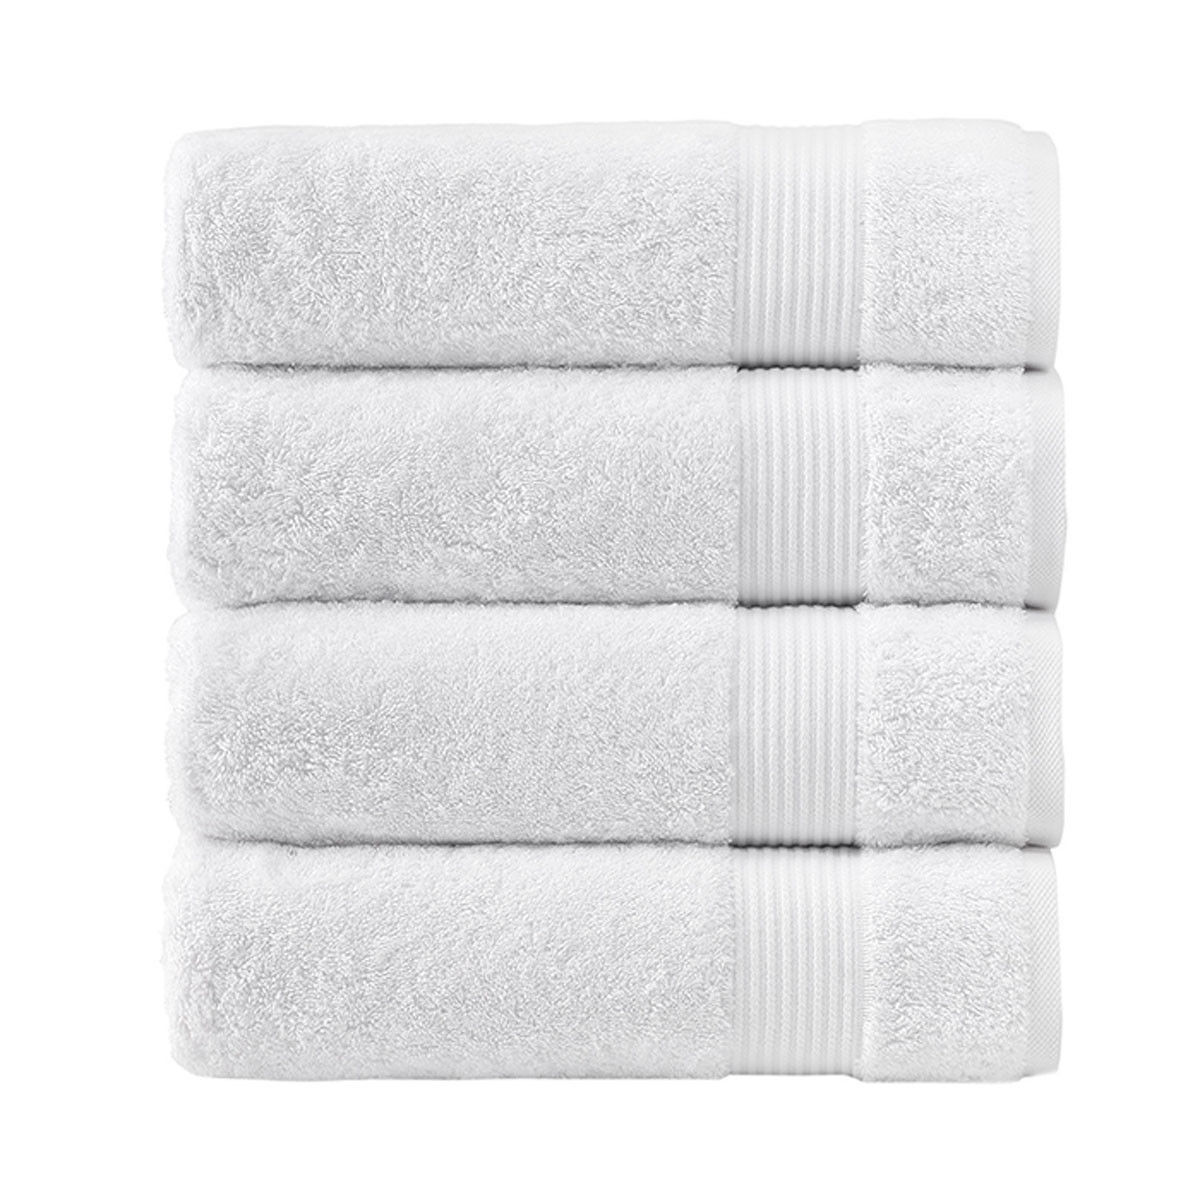 In which country are the Amadeus Turkish White Towel Collection and bulk Turkish blankets produced?